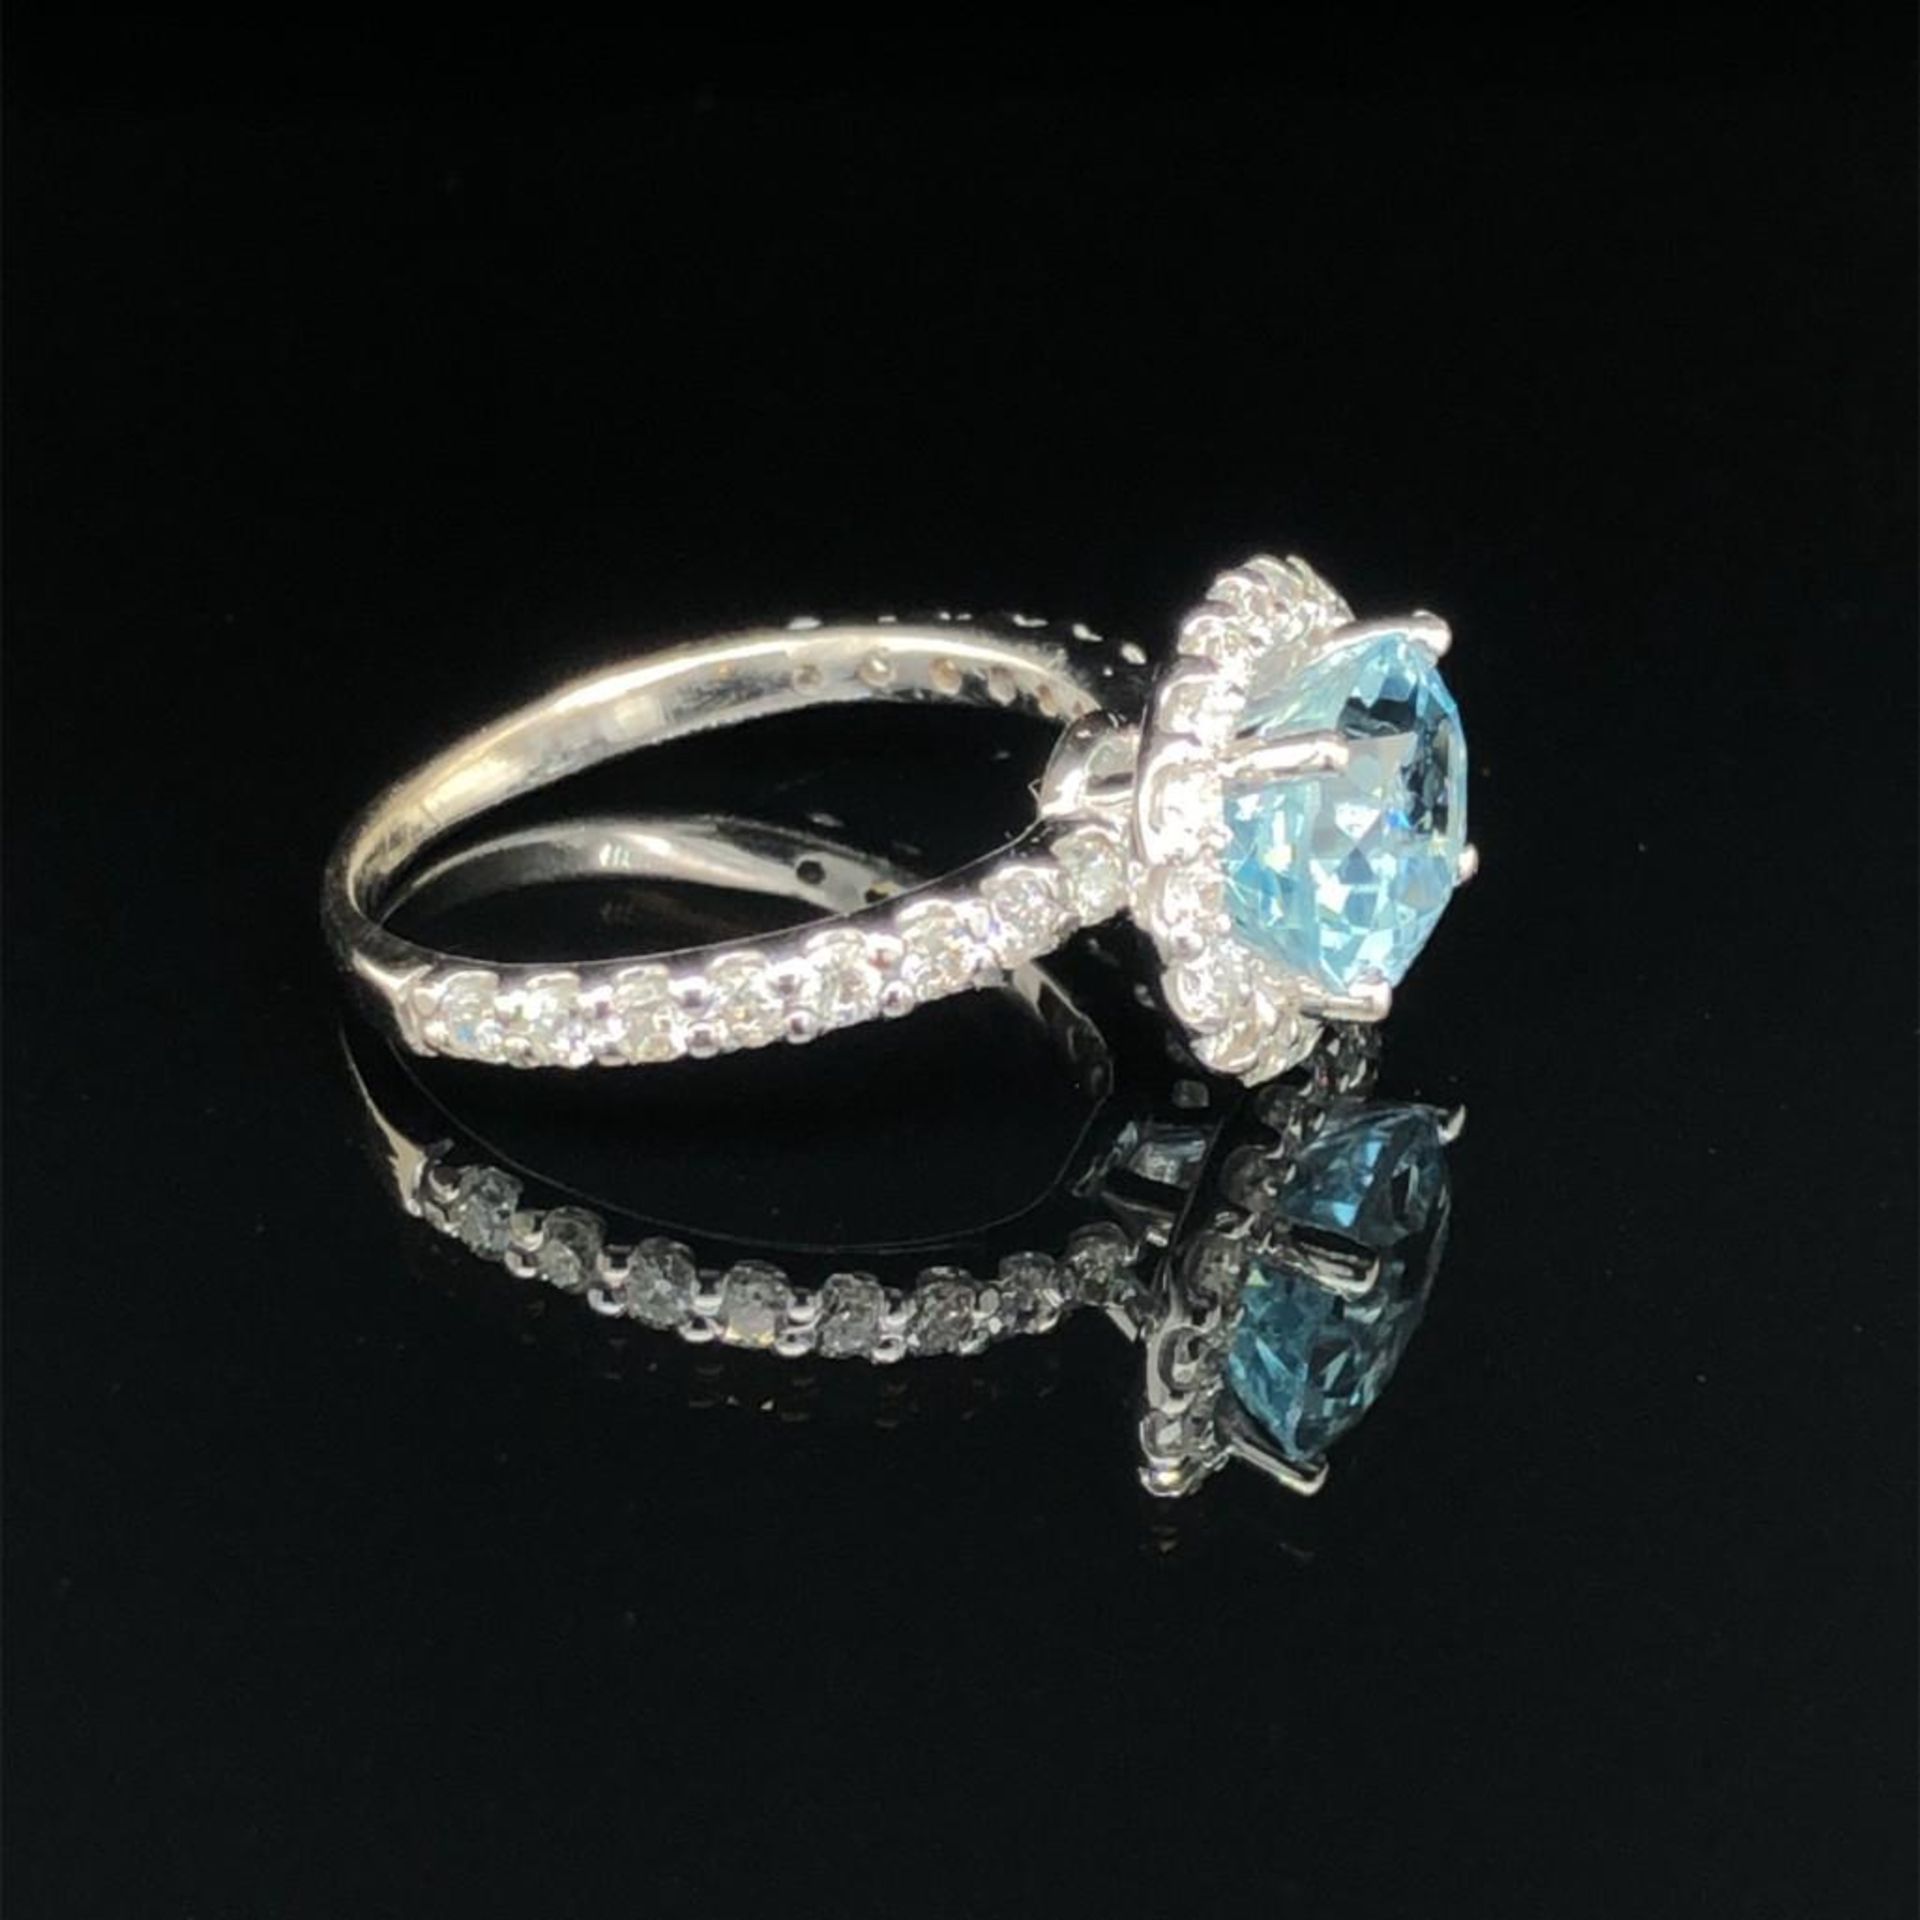 ESTATE AQUA MARINE AND DIAMOND RING. 14k WHITE GOLD. APPROXIMATELY .50ct DIAMONDS. WEIGHS APPROXIMAT